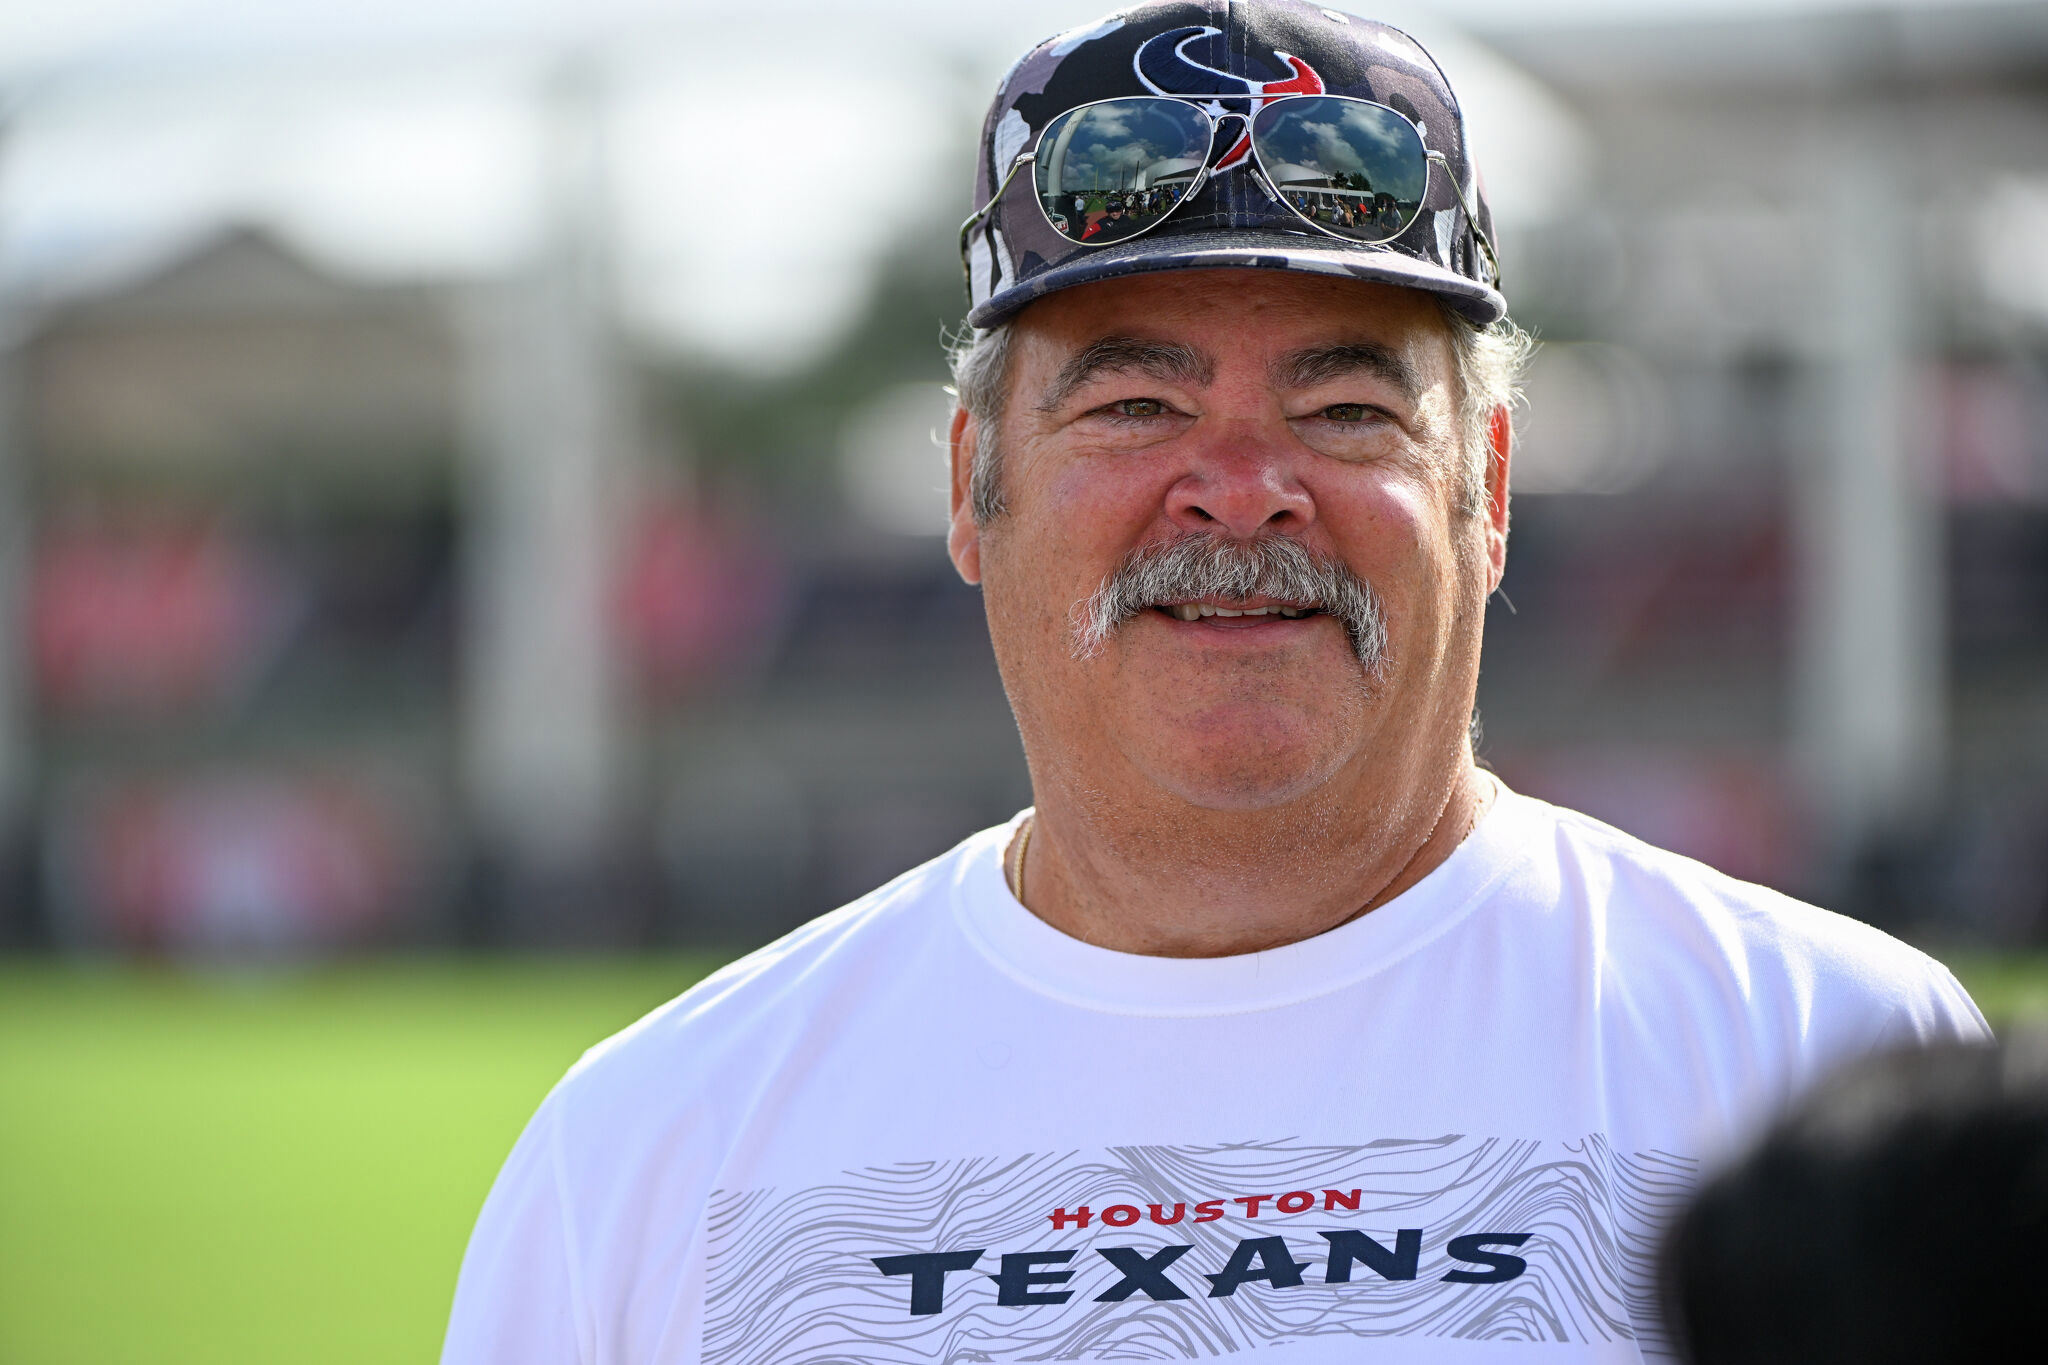 Houston Texans owner Cal McNair drops hint about new uniforms in Reddit AMA